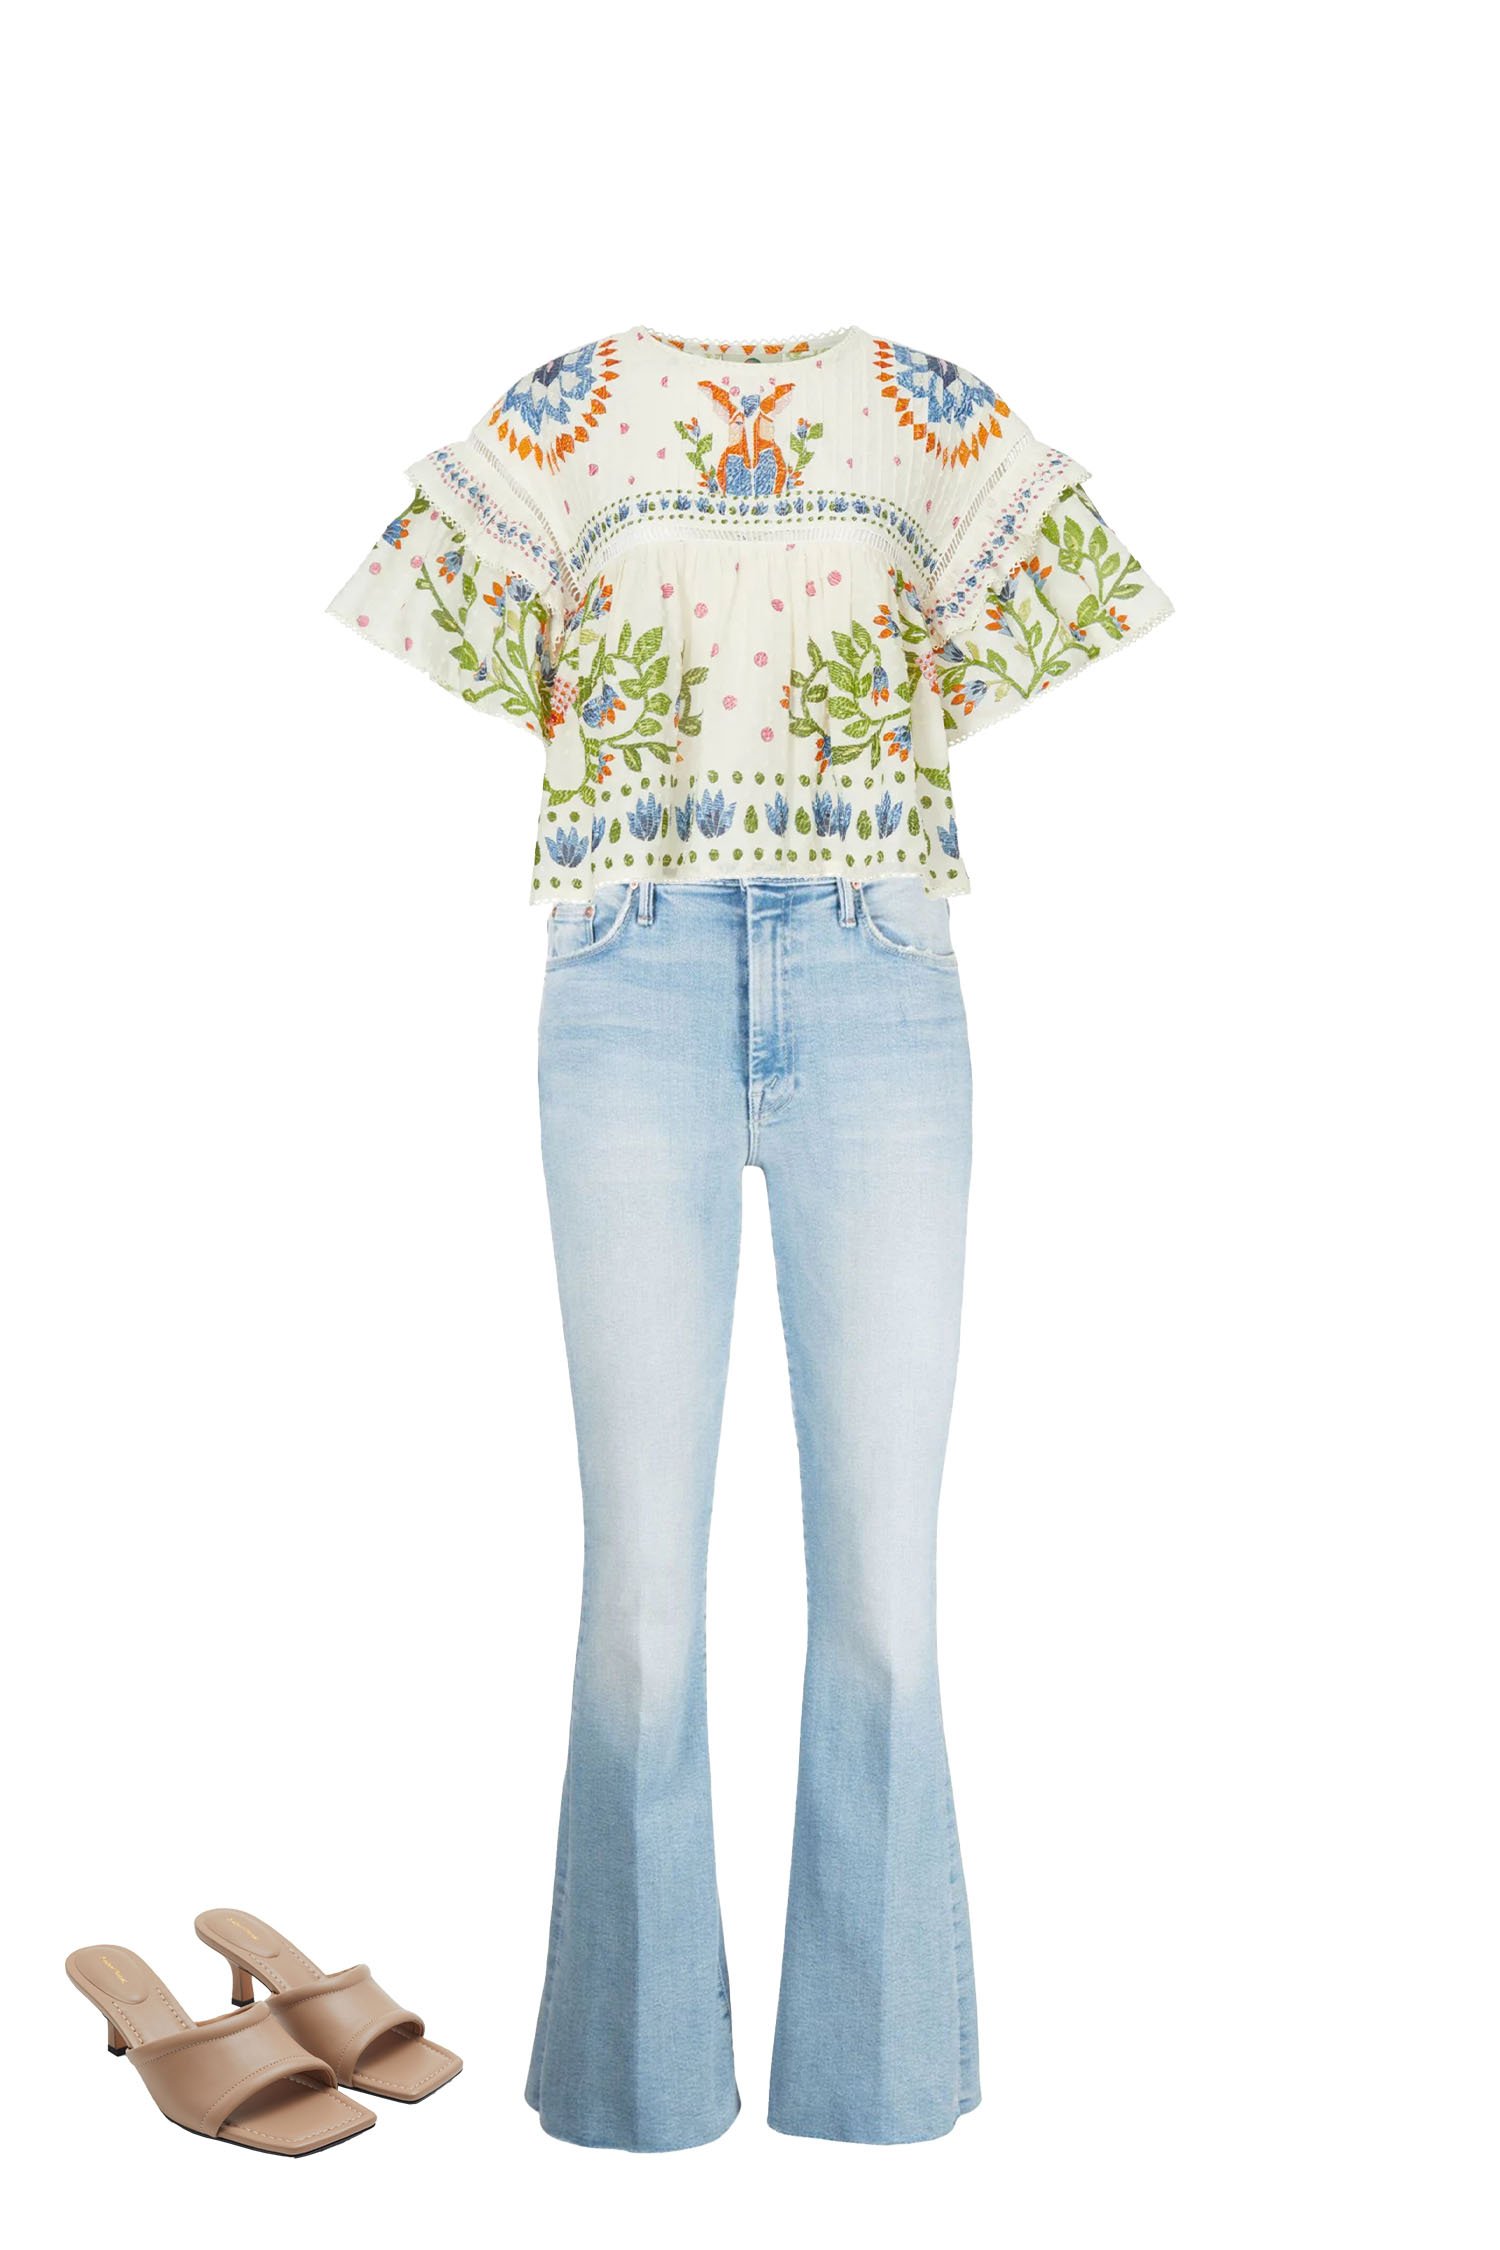 Pair Light Blue Flare Jeans with White Garden Print Crop Cotton Top, and Beige Square Toe Kitten Heel Sandals